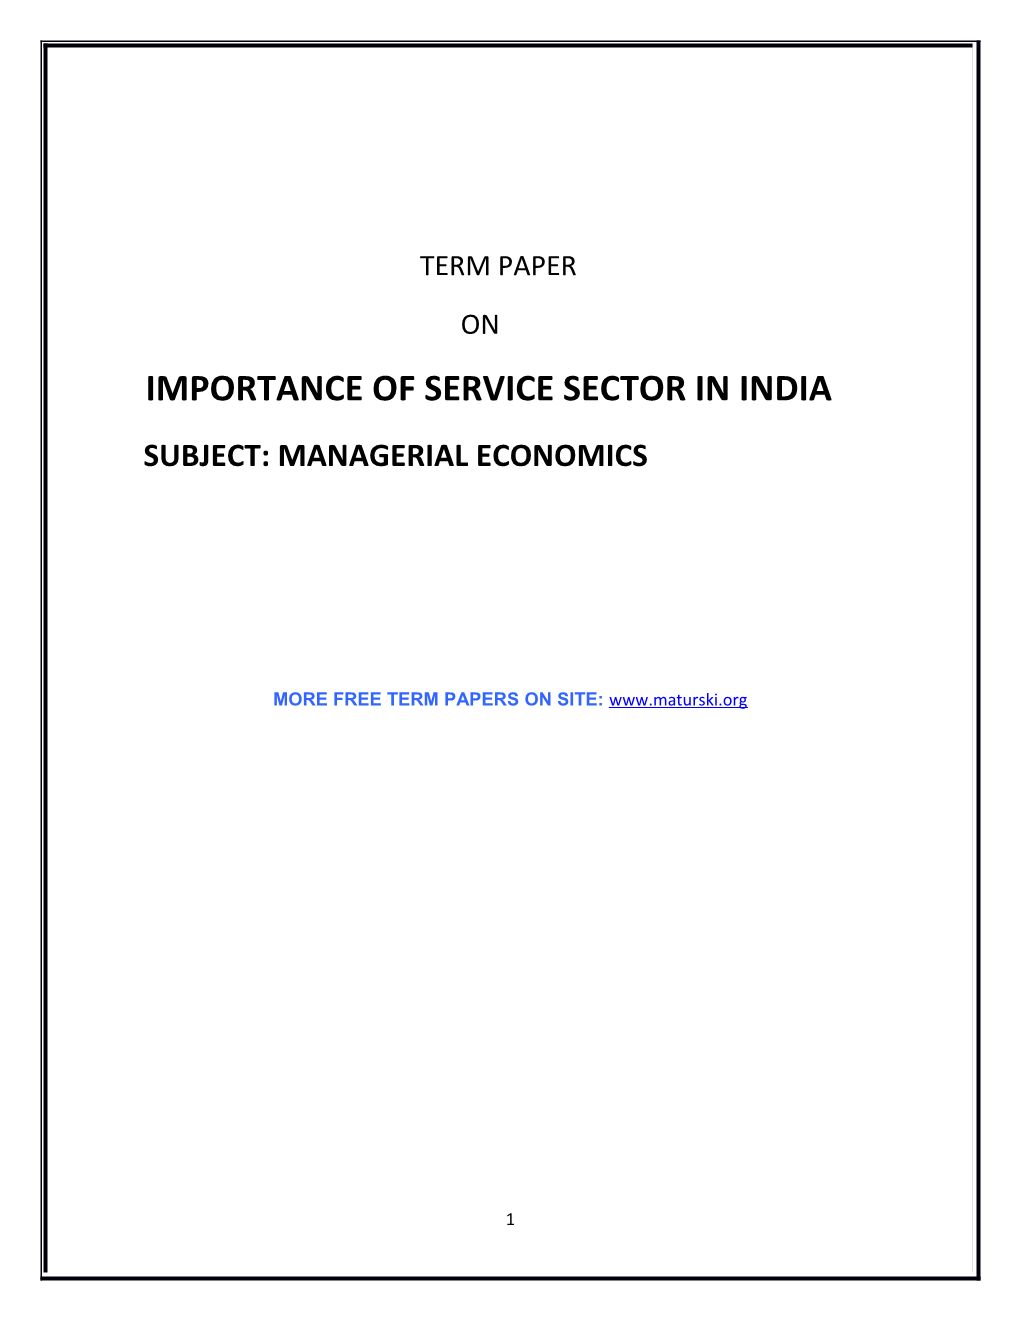 Importance of Service Sector in India